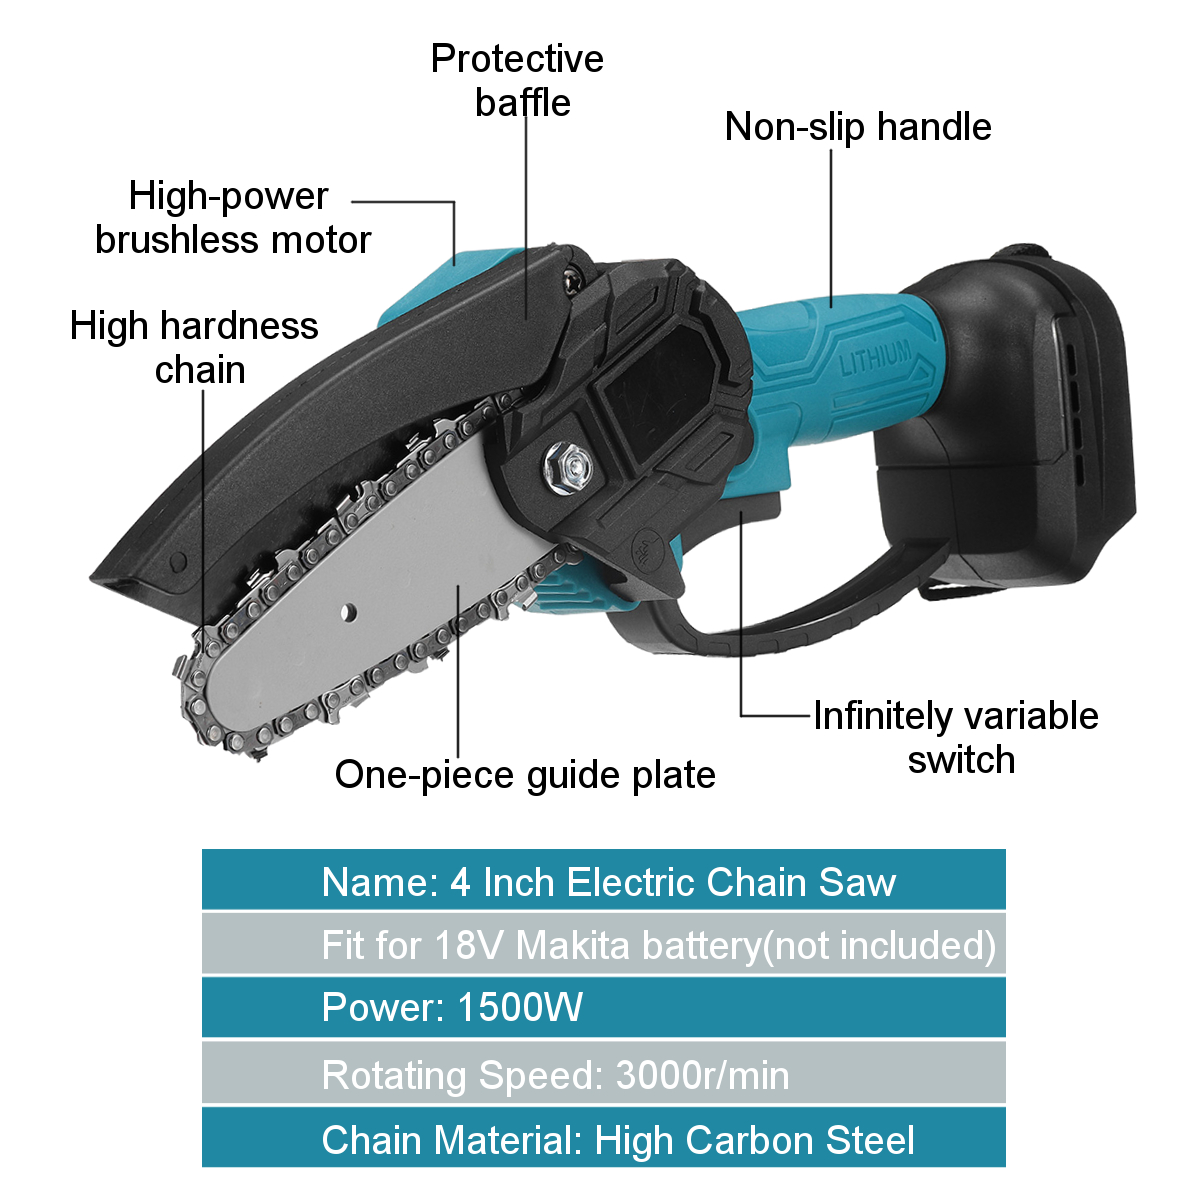 4-Inch-Electric-Chain-Saw-Cordless-Chainsaw-Multi-function-Woodworking-Wood-Cutter-For-Makita-18V-Ba-1861026-4